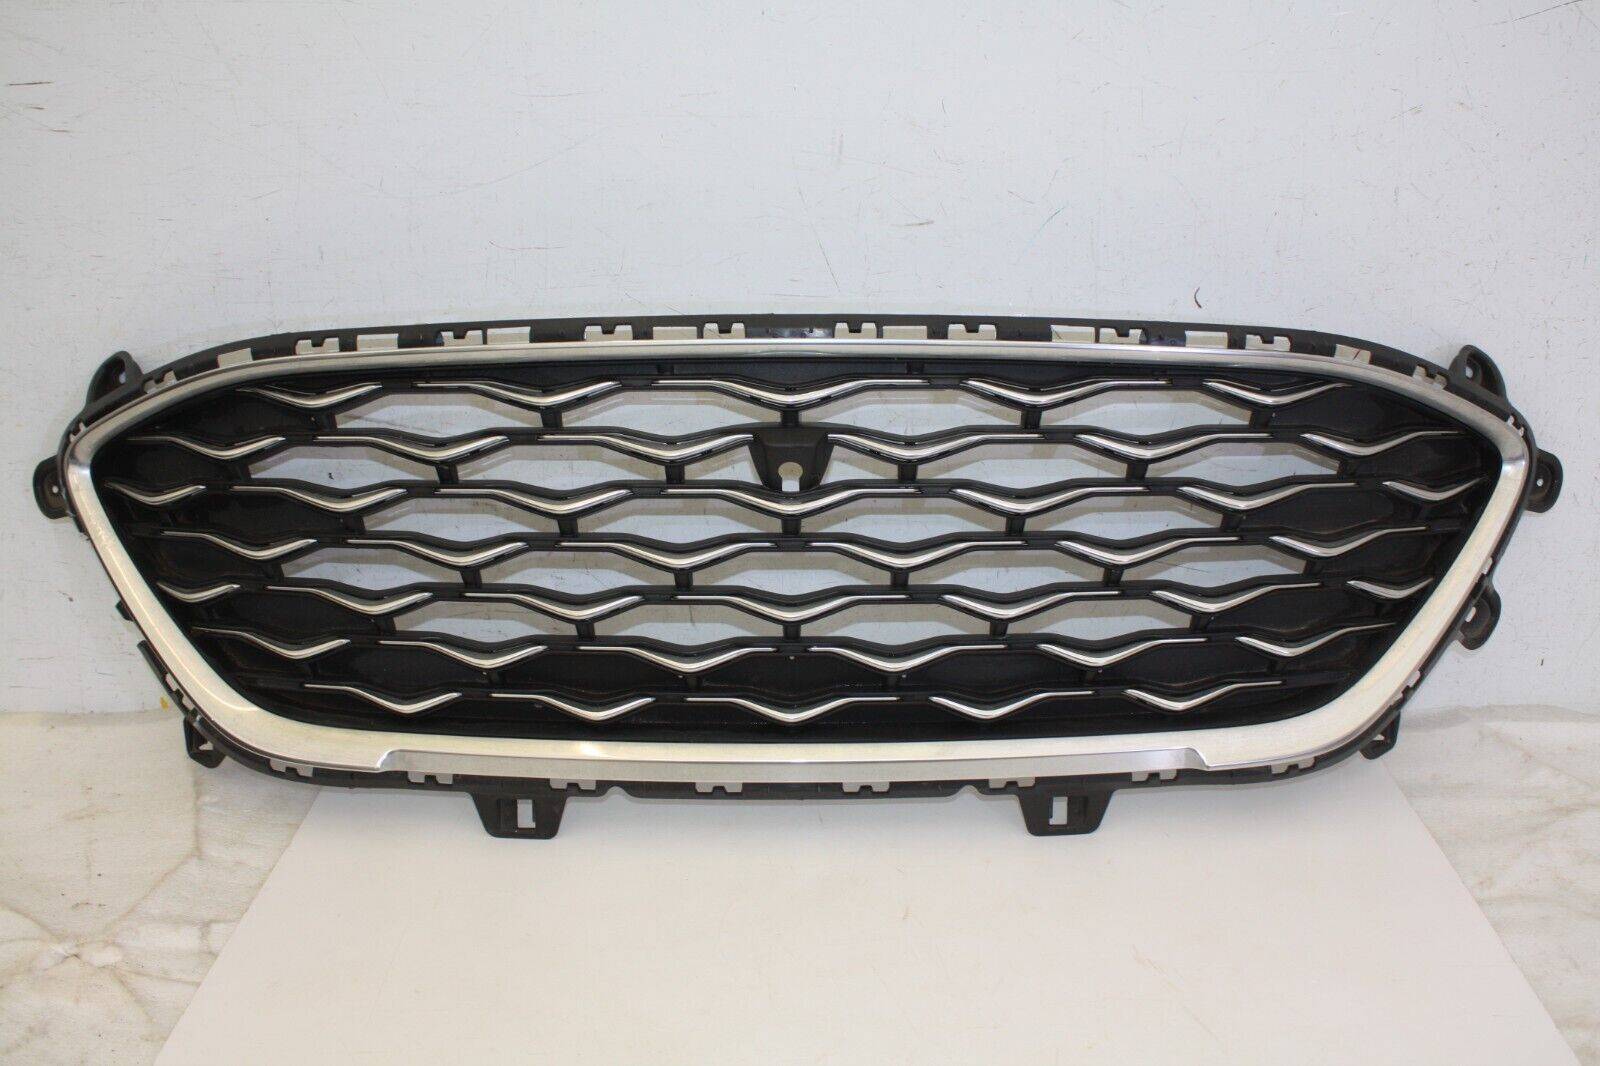 Ford-Kuga-Front-Bumper-Grill-2020-ON-LV4B-8200-V-Genuine-SEE-PICS-176281041988